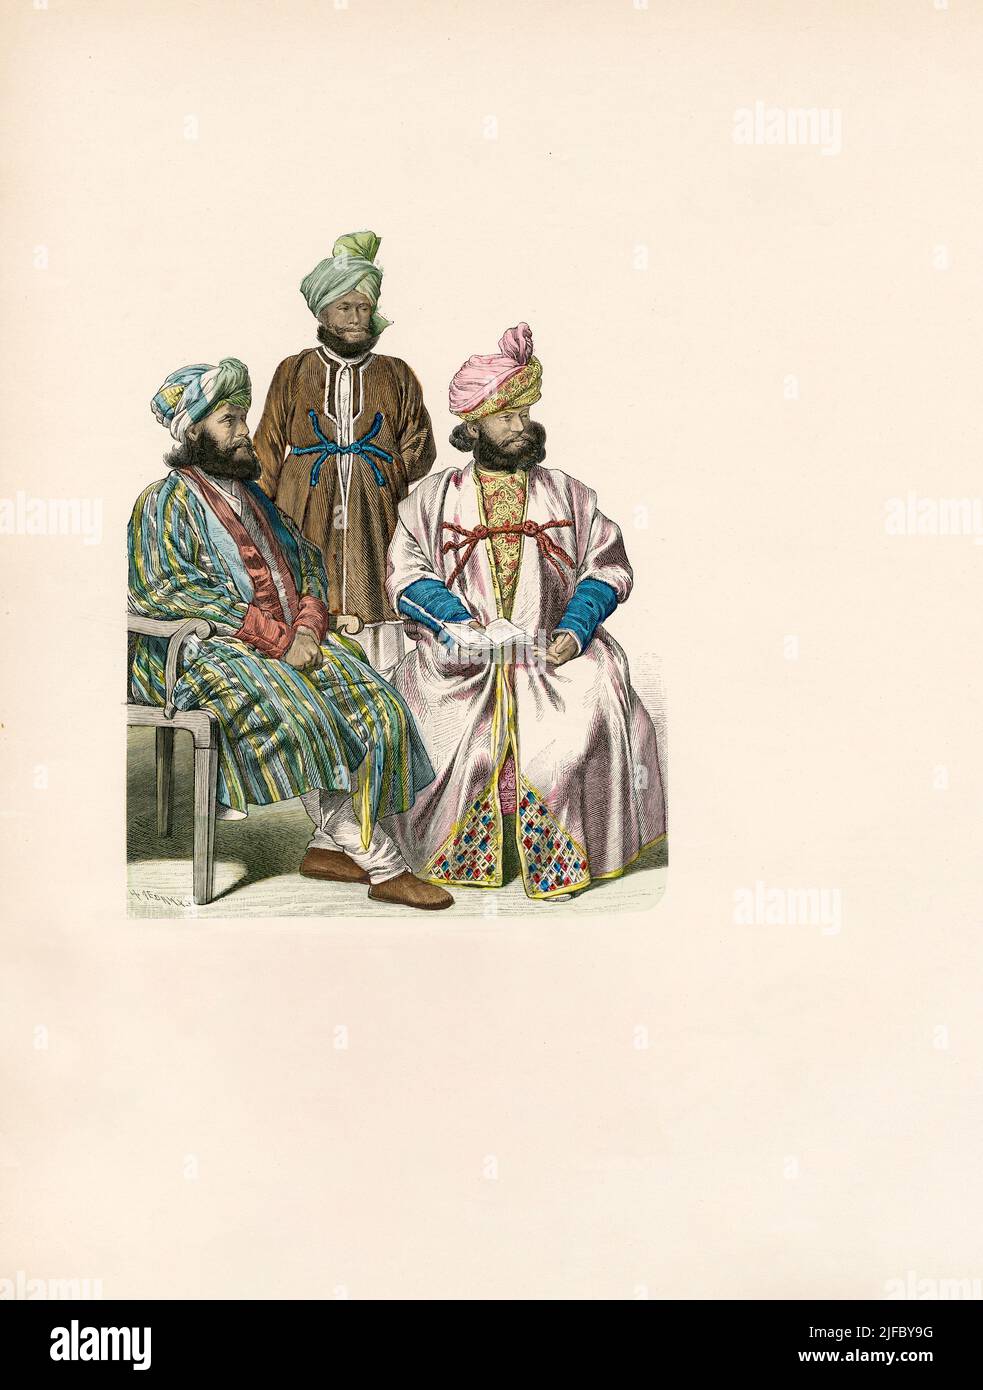 Atah Mahomed, Ambassador at Kabul and his Retinue, Afghanistan, late 19th Century, Illustration, The History of Costume, Braun & Schneider, Munich, Germany, 1861-1880 Stock Photo